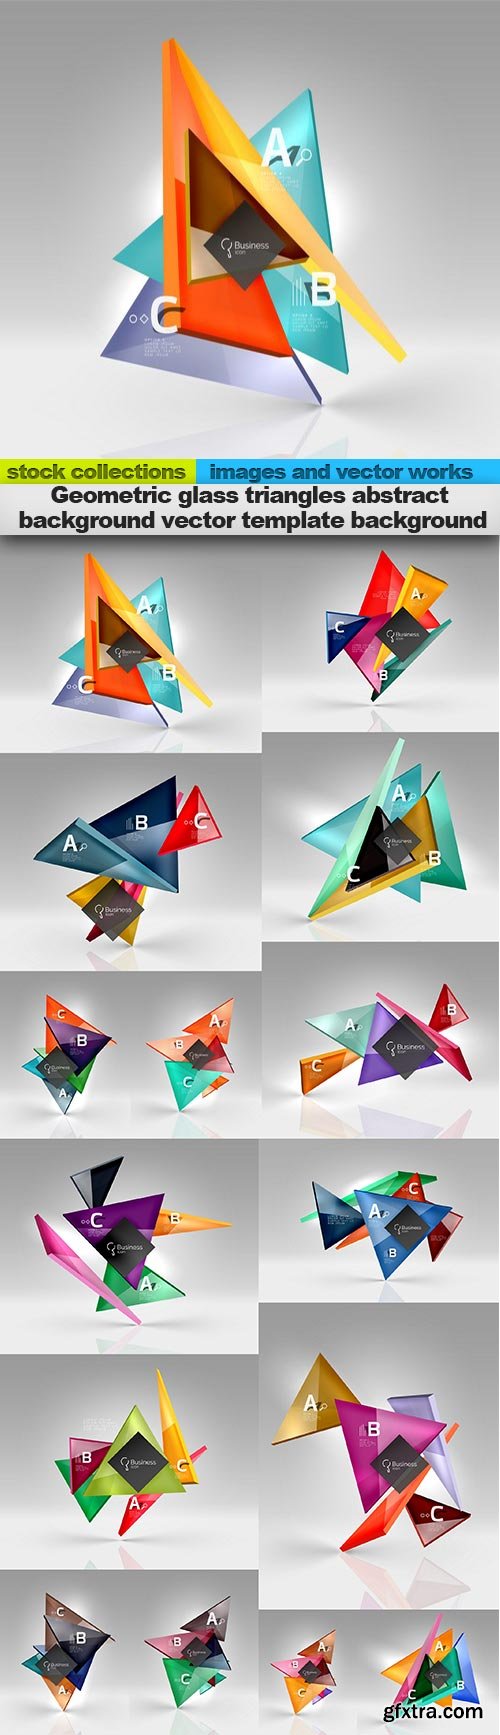 Geometric glass triangles abstract background vector template background, 15 x EPS